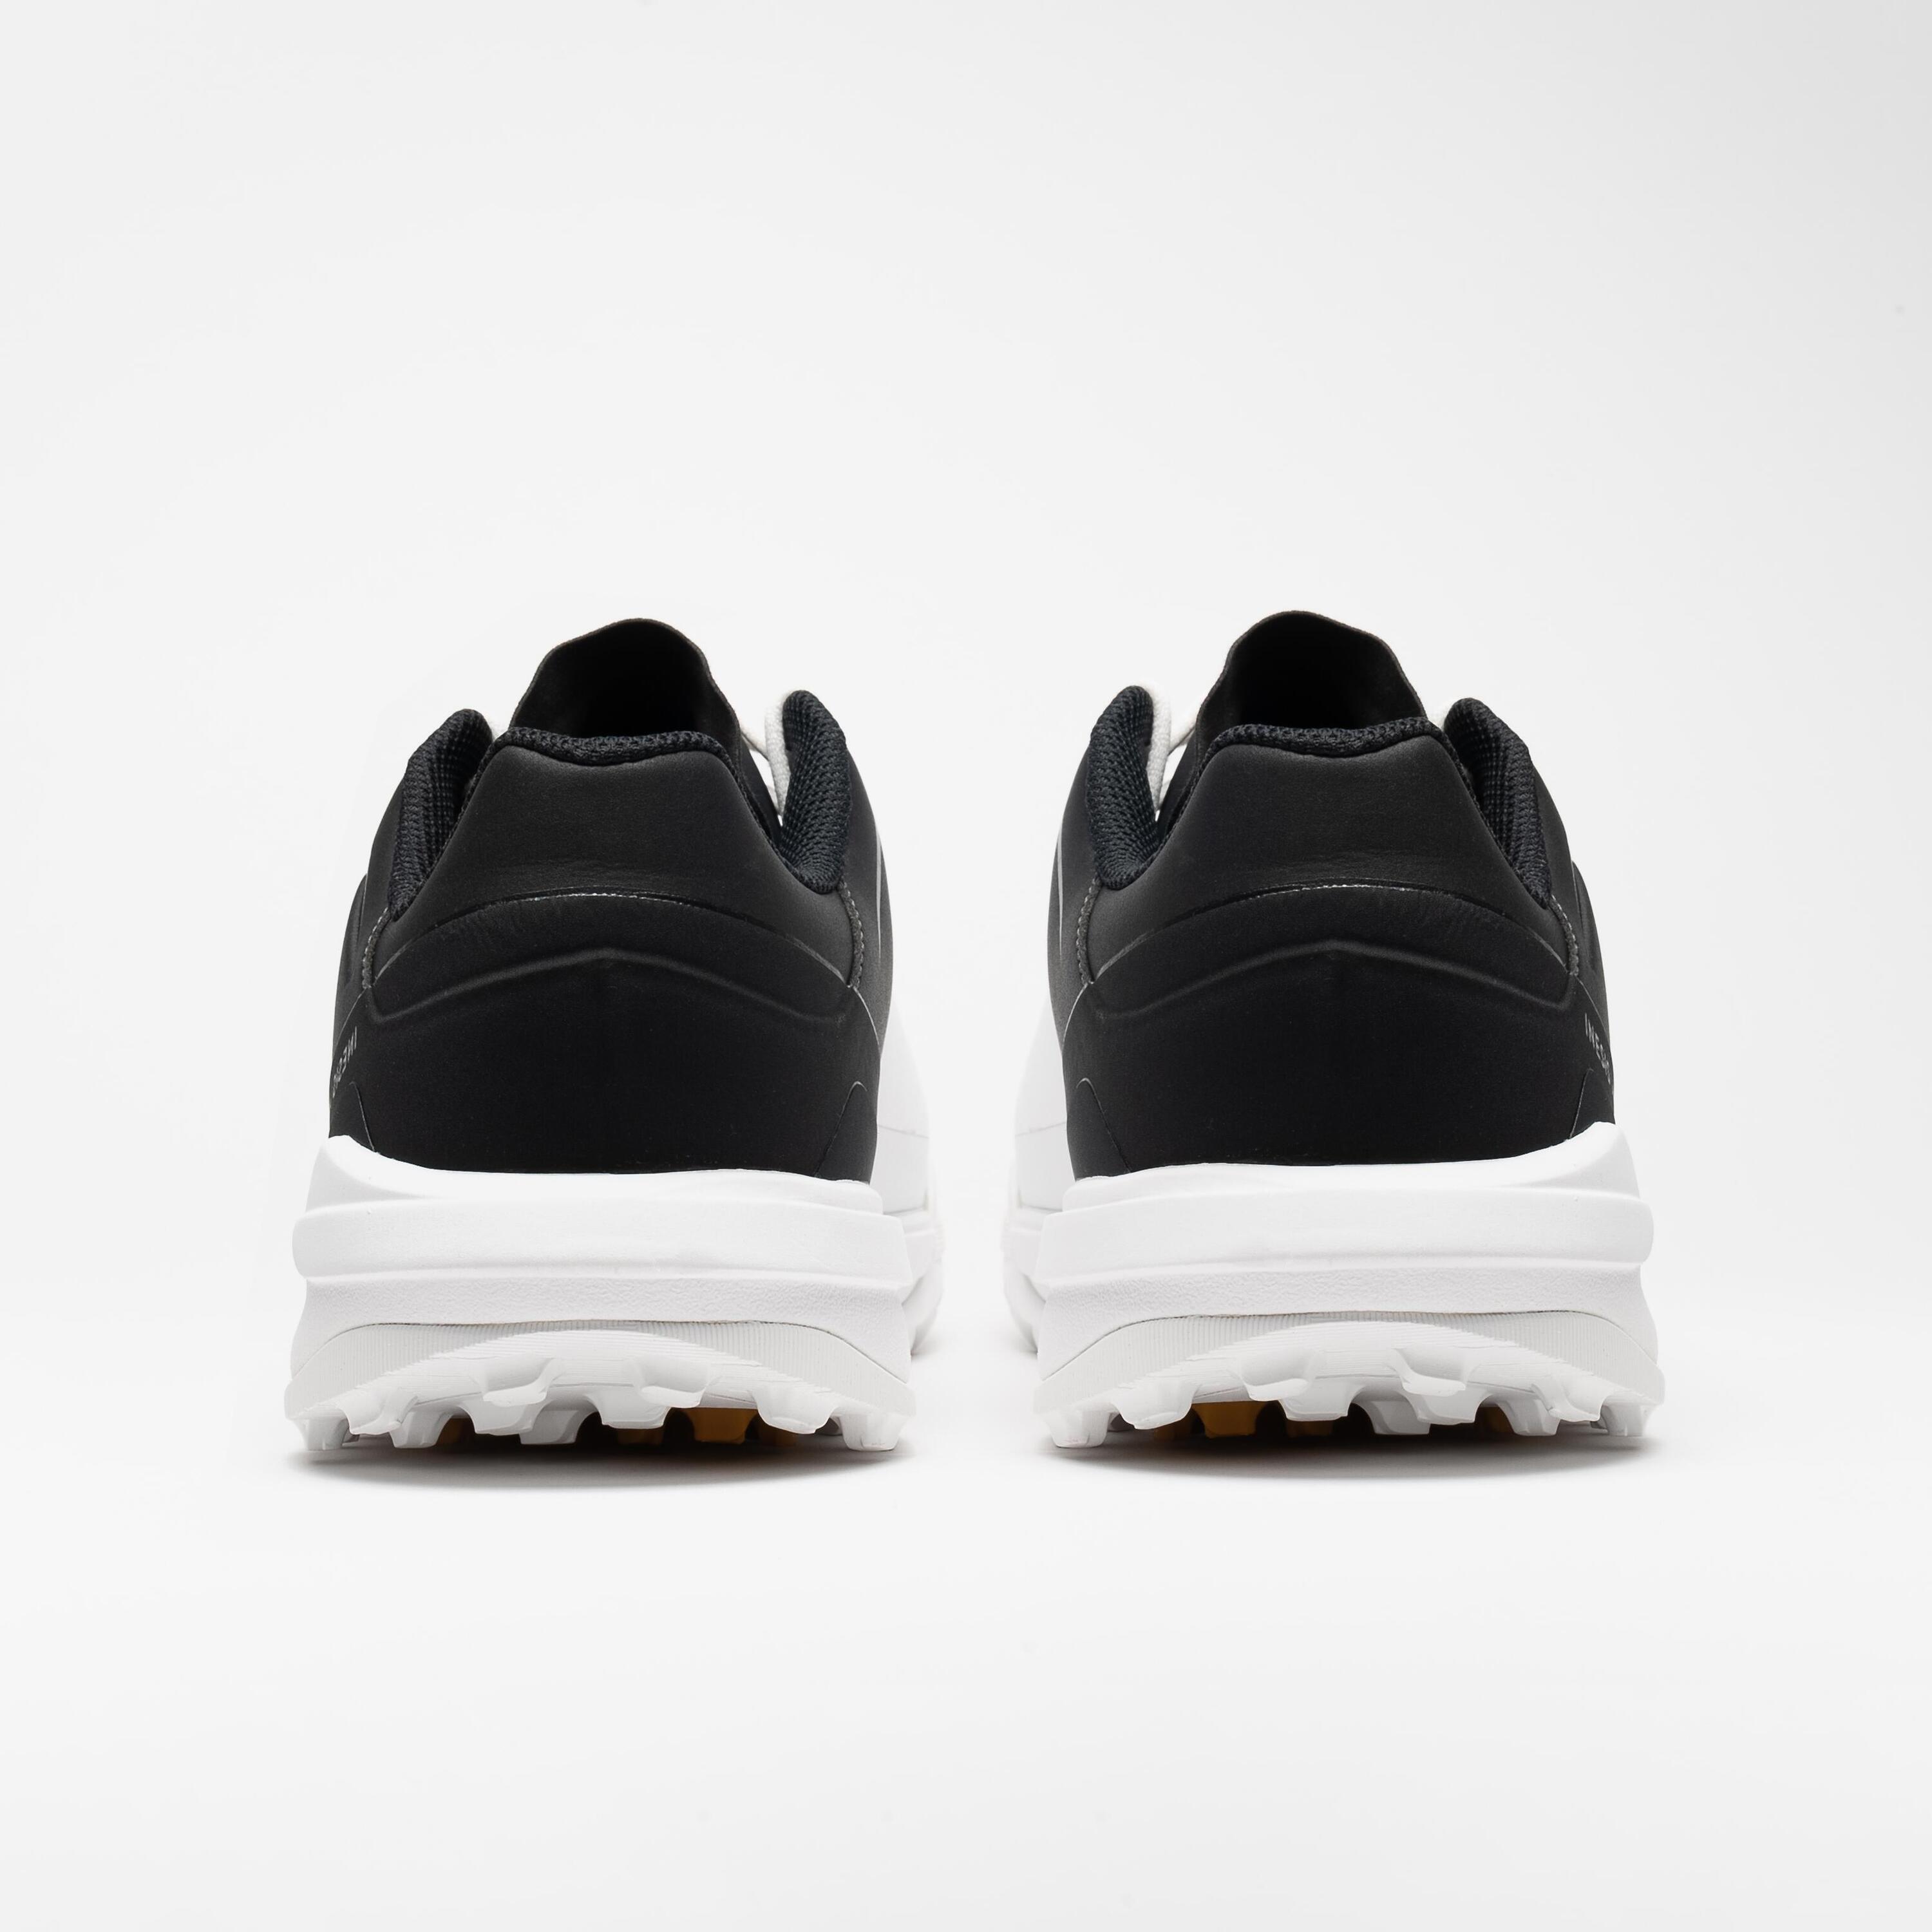 Men's golf waterproof shoes - MW 500 - white and carbon 4/7